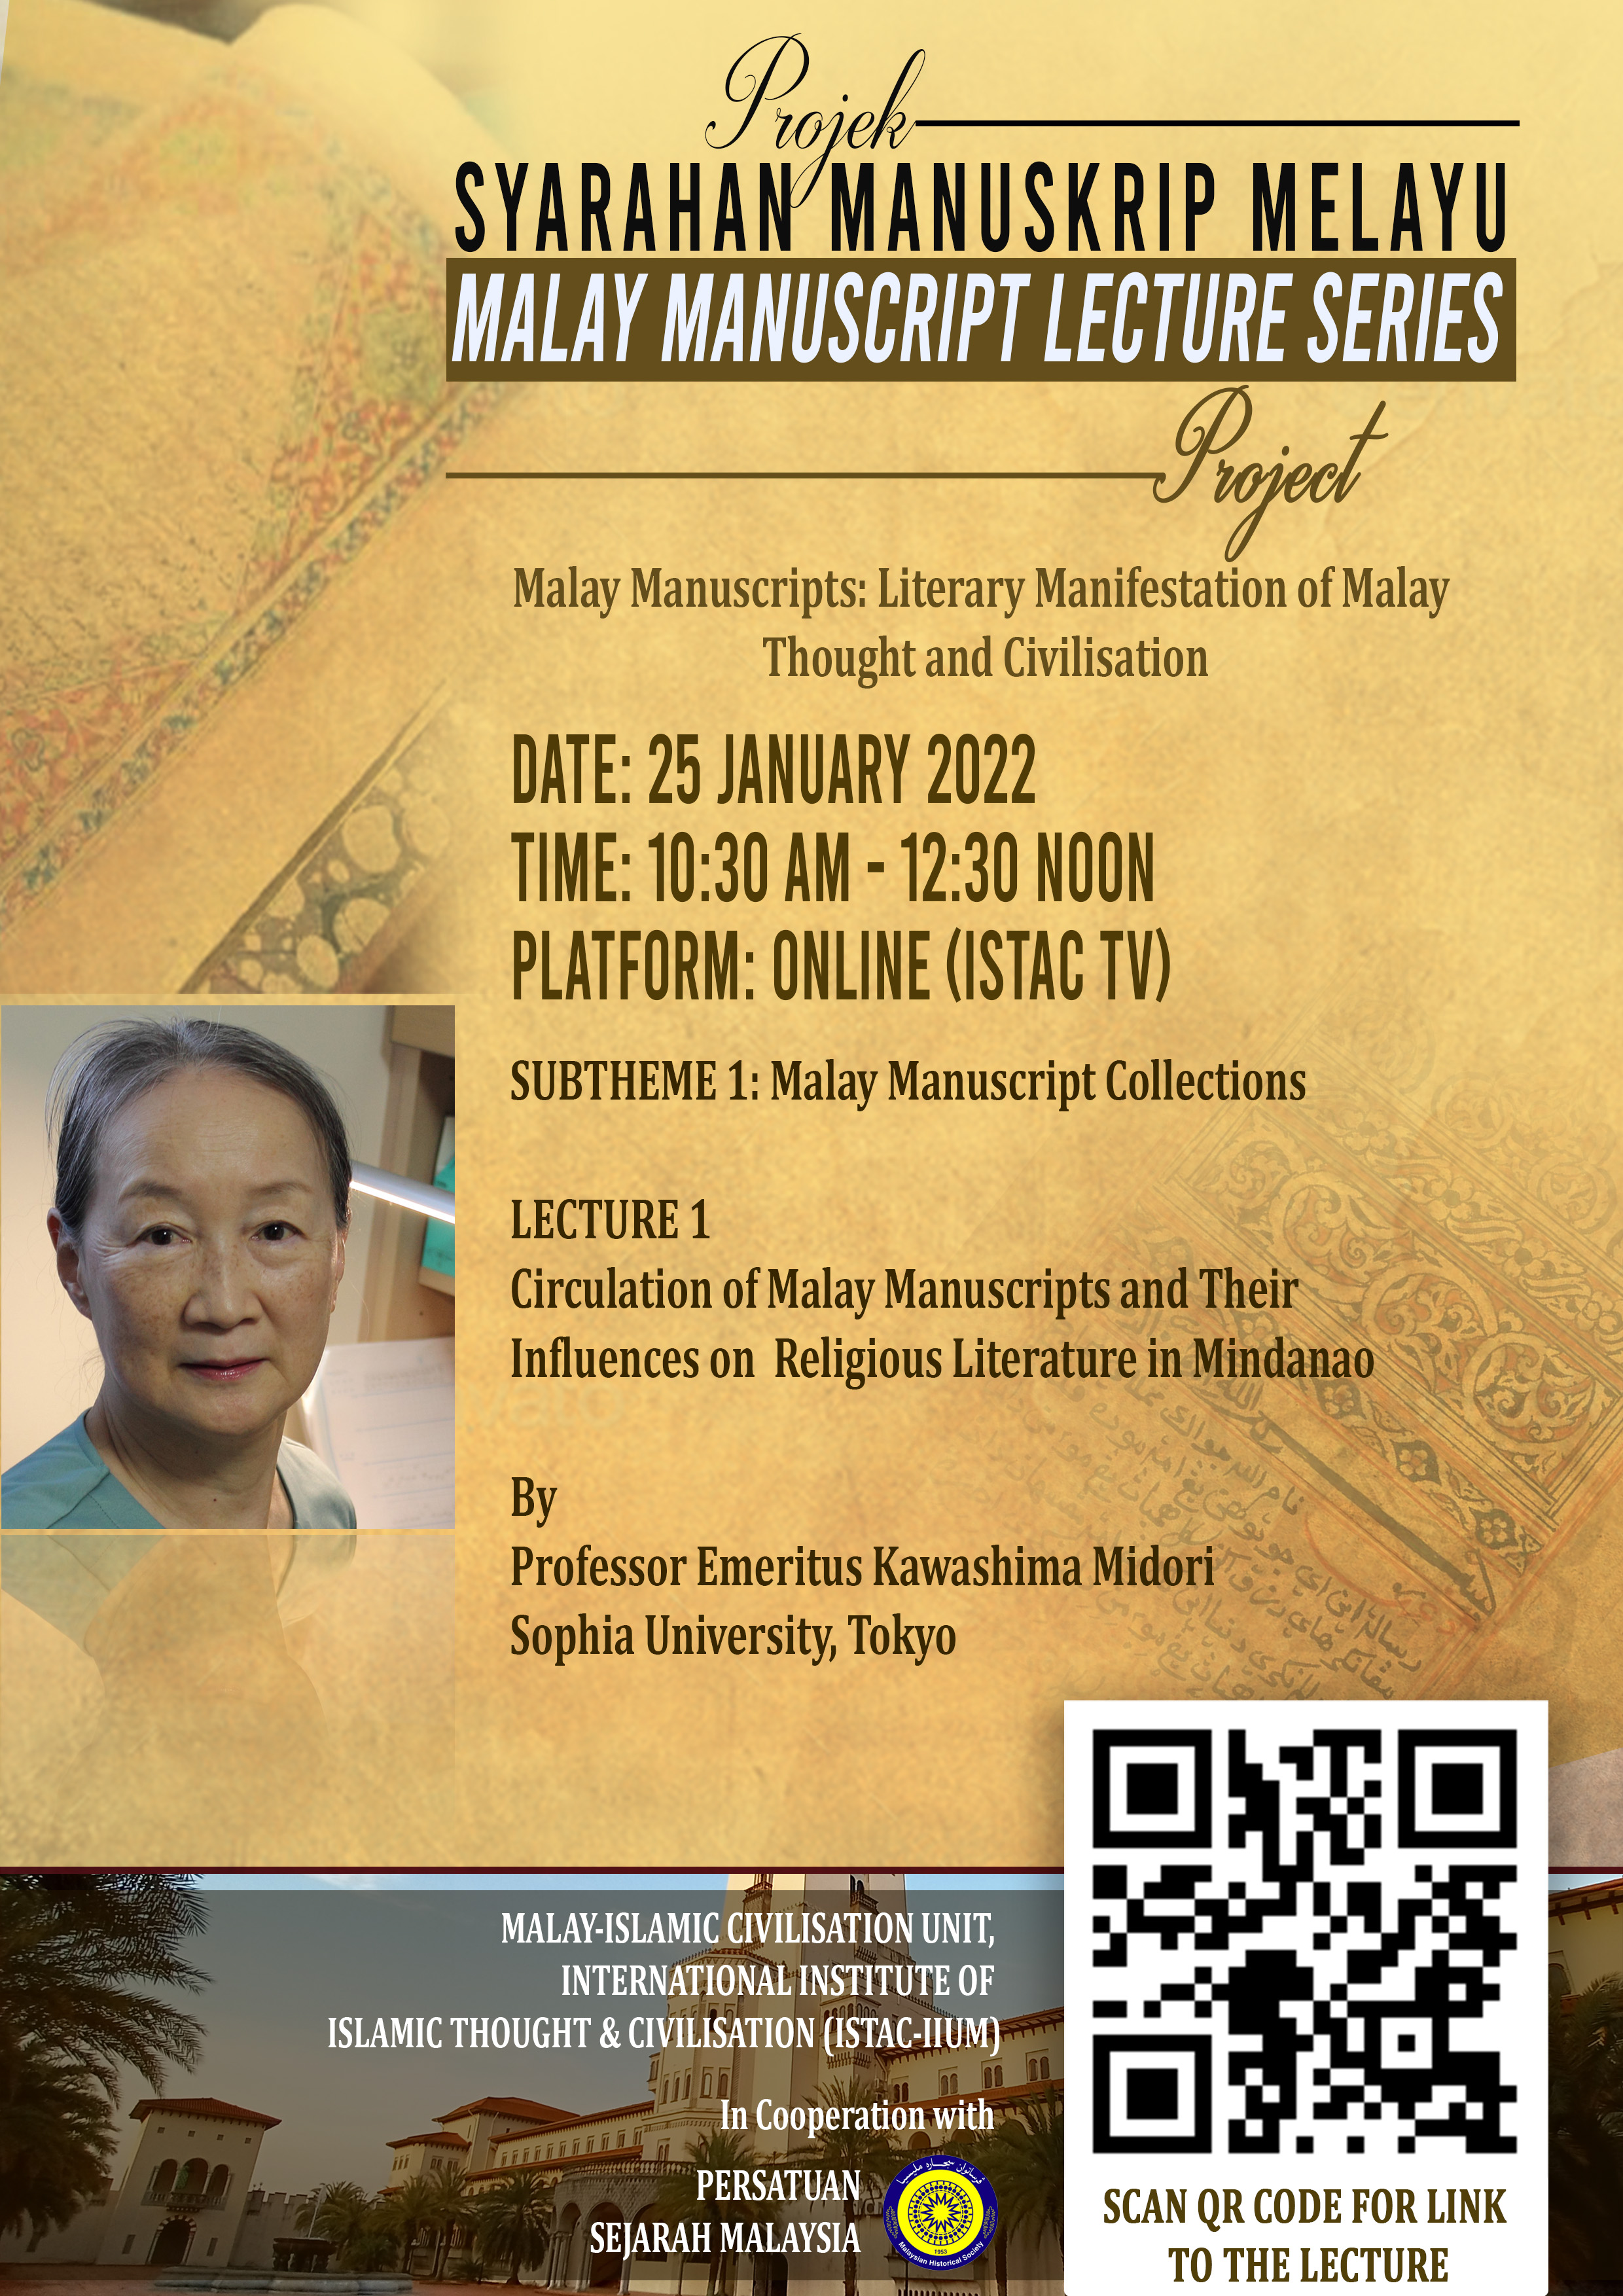 THE FIRST LECTURE OF MALAY MANUSCRIPT LECTURE SERIES PROJECT